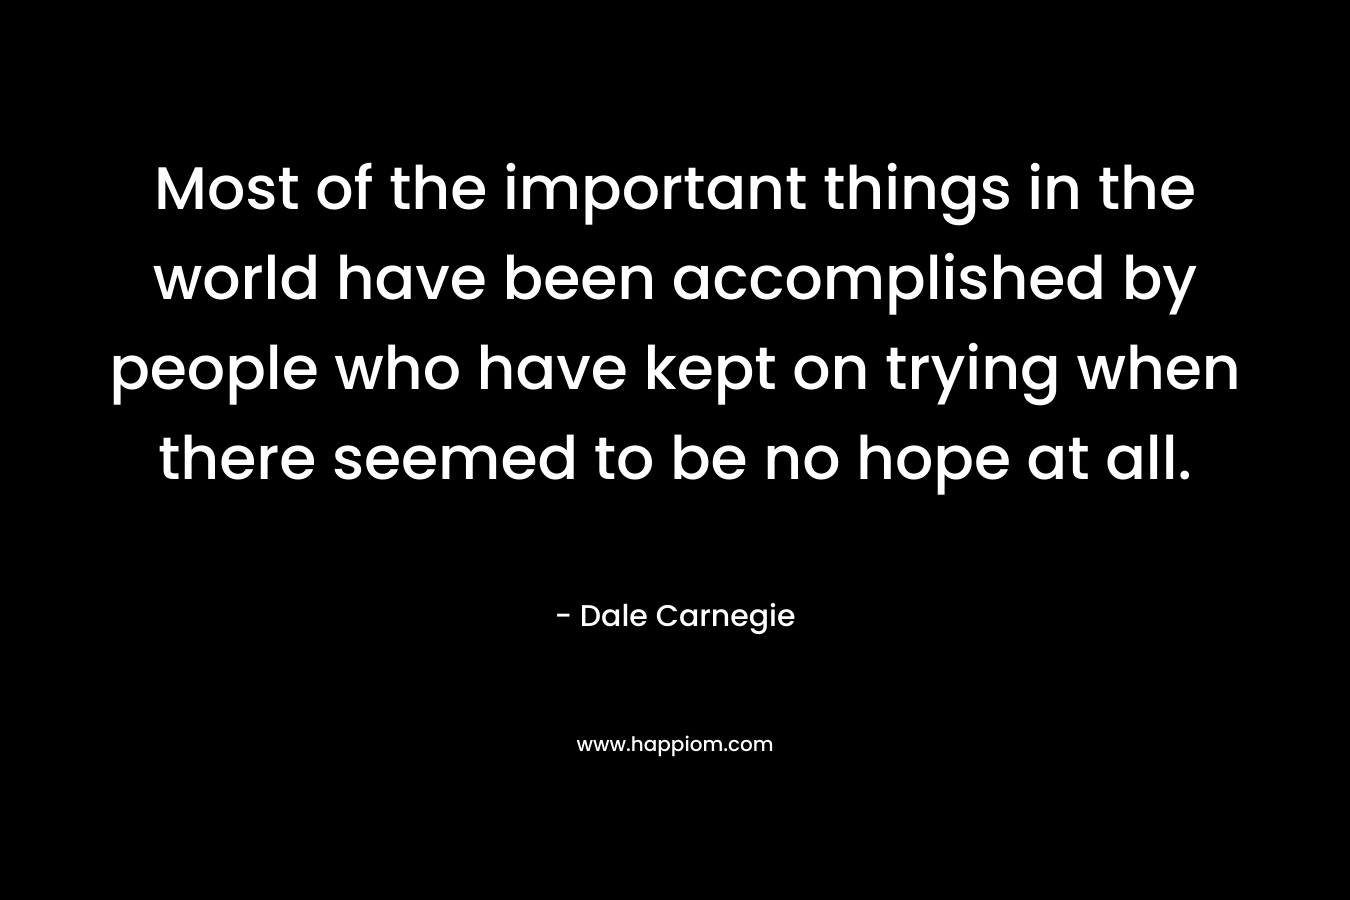 Most of the important things in the world have been accomplished by people who have kept on trying when there seemed to be no hope at all. – Dale Carnegie